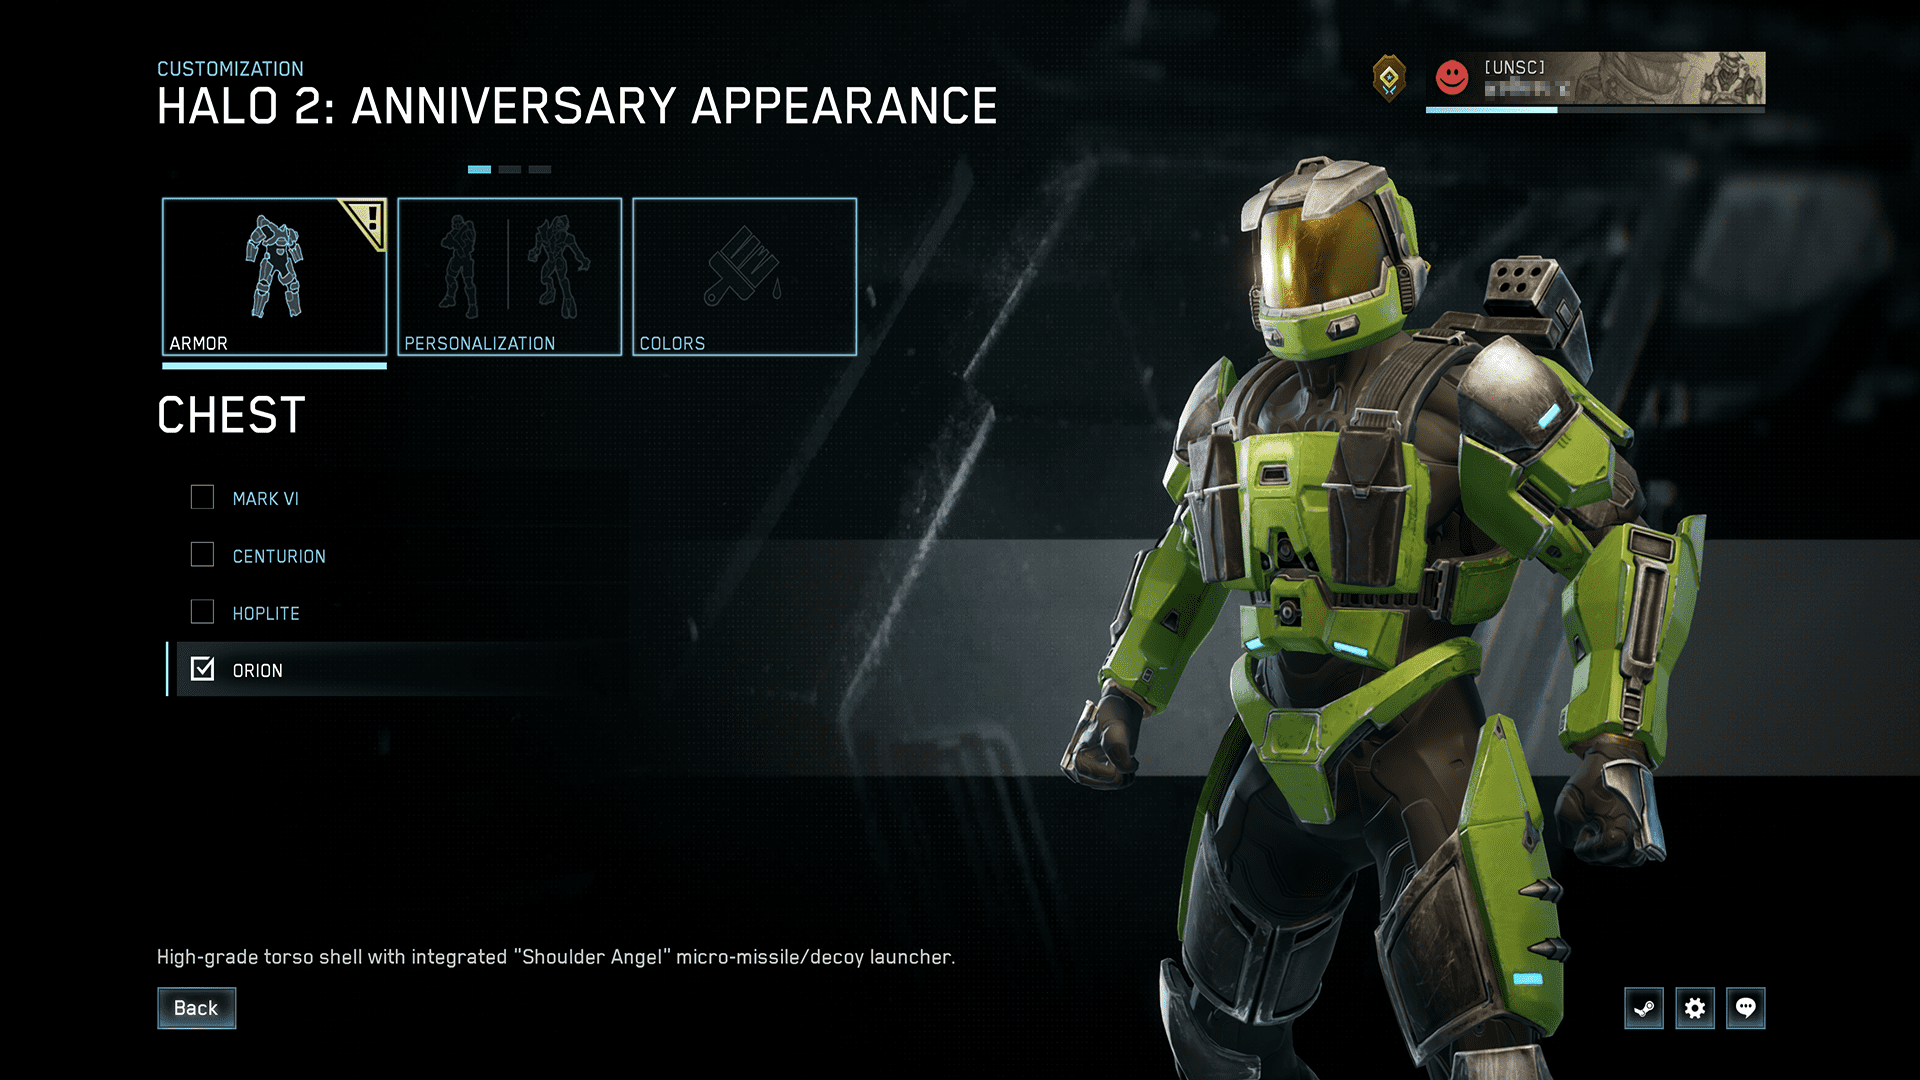 Halo 4 joins The Master Chief Collection fully remastered next week for PC